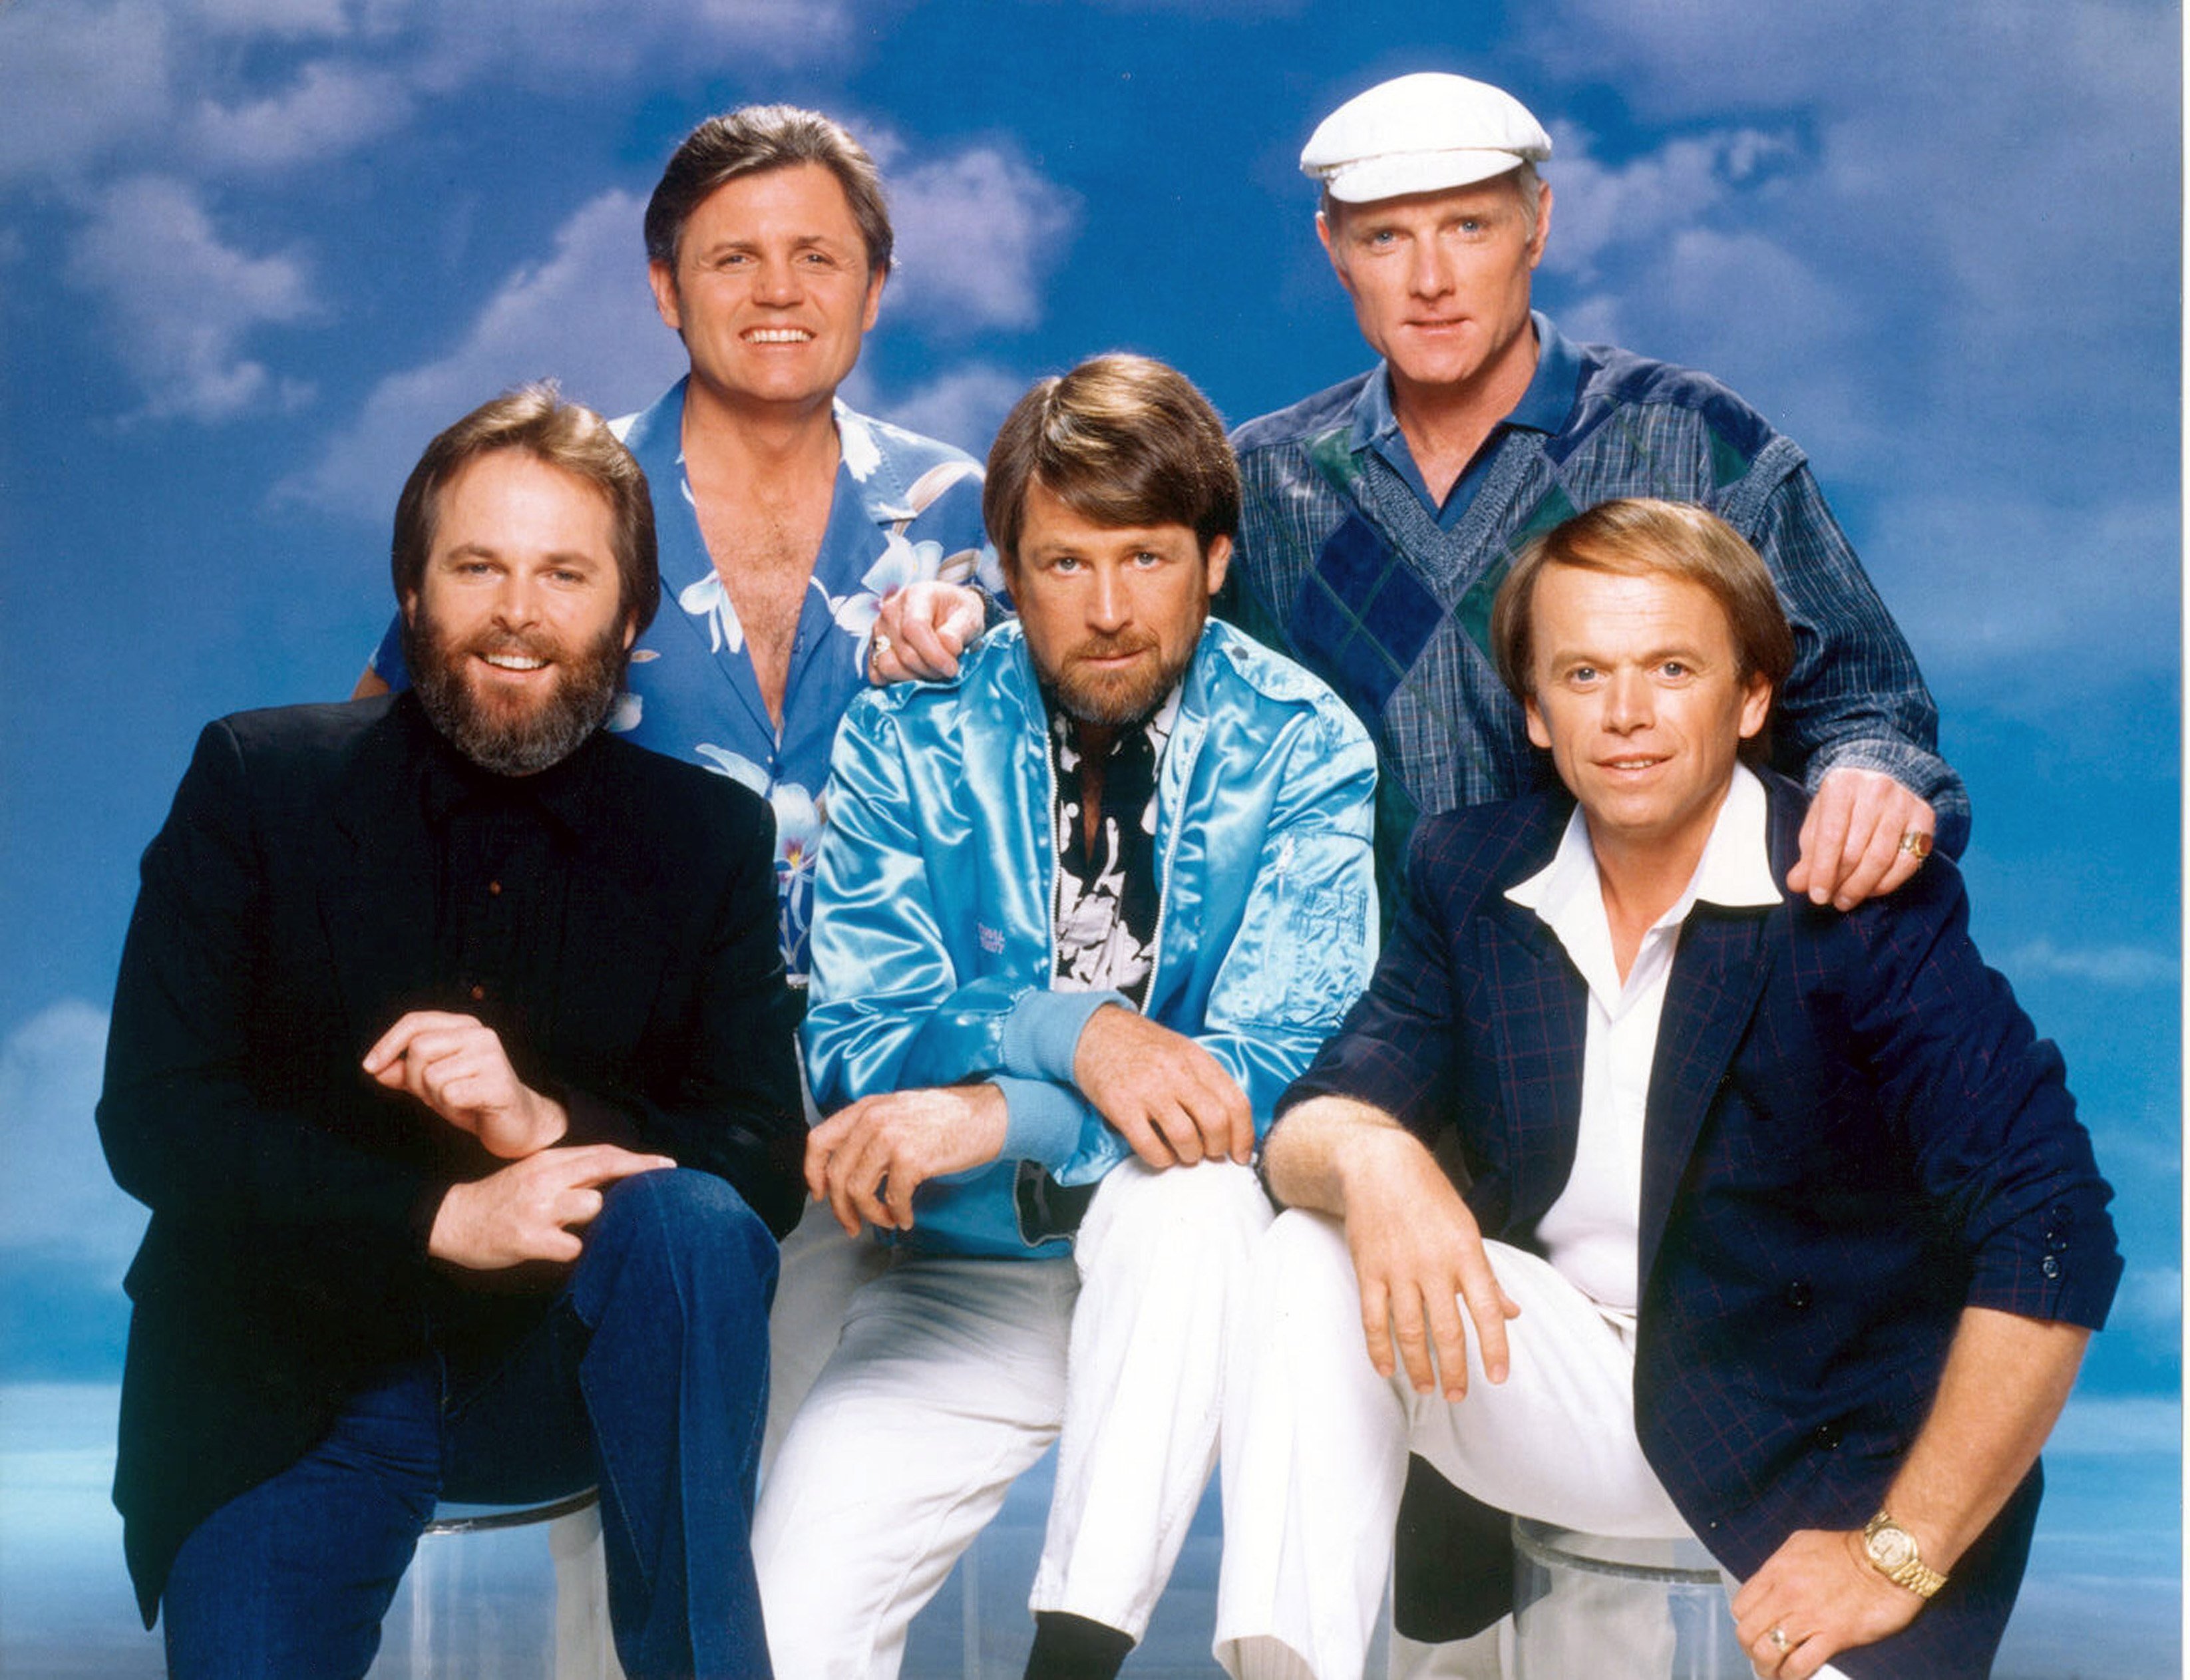 Brian Wilson Wanted His Brother, Carl, To Sing ‘God Only Knows’ by the Beach Boys